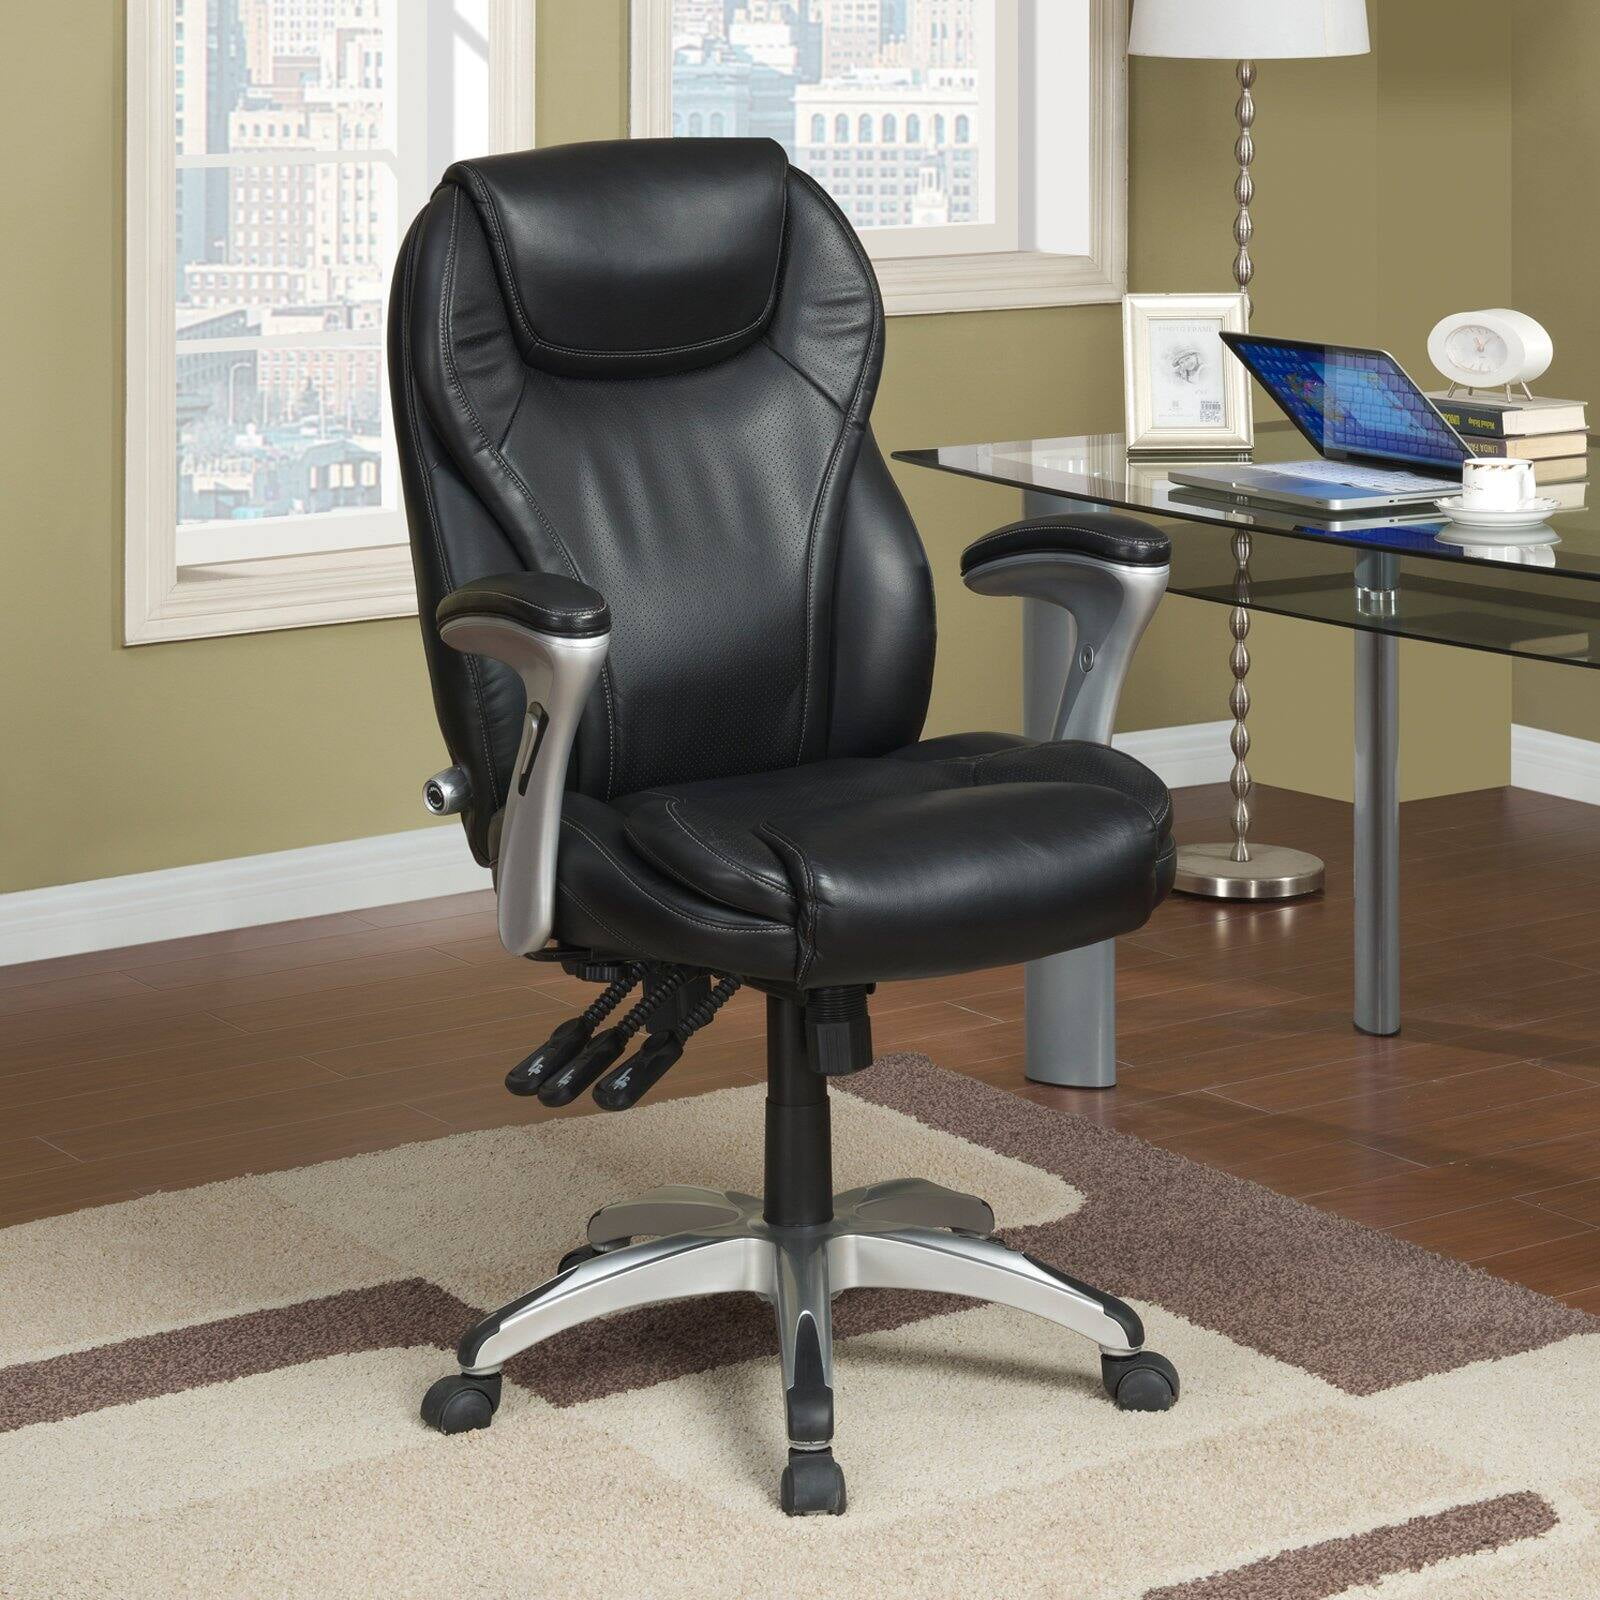 Serta Heavy-Duty Bonded Leather Commercial Office Chair with Memory Foam,  350 lb capacity, Brown